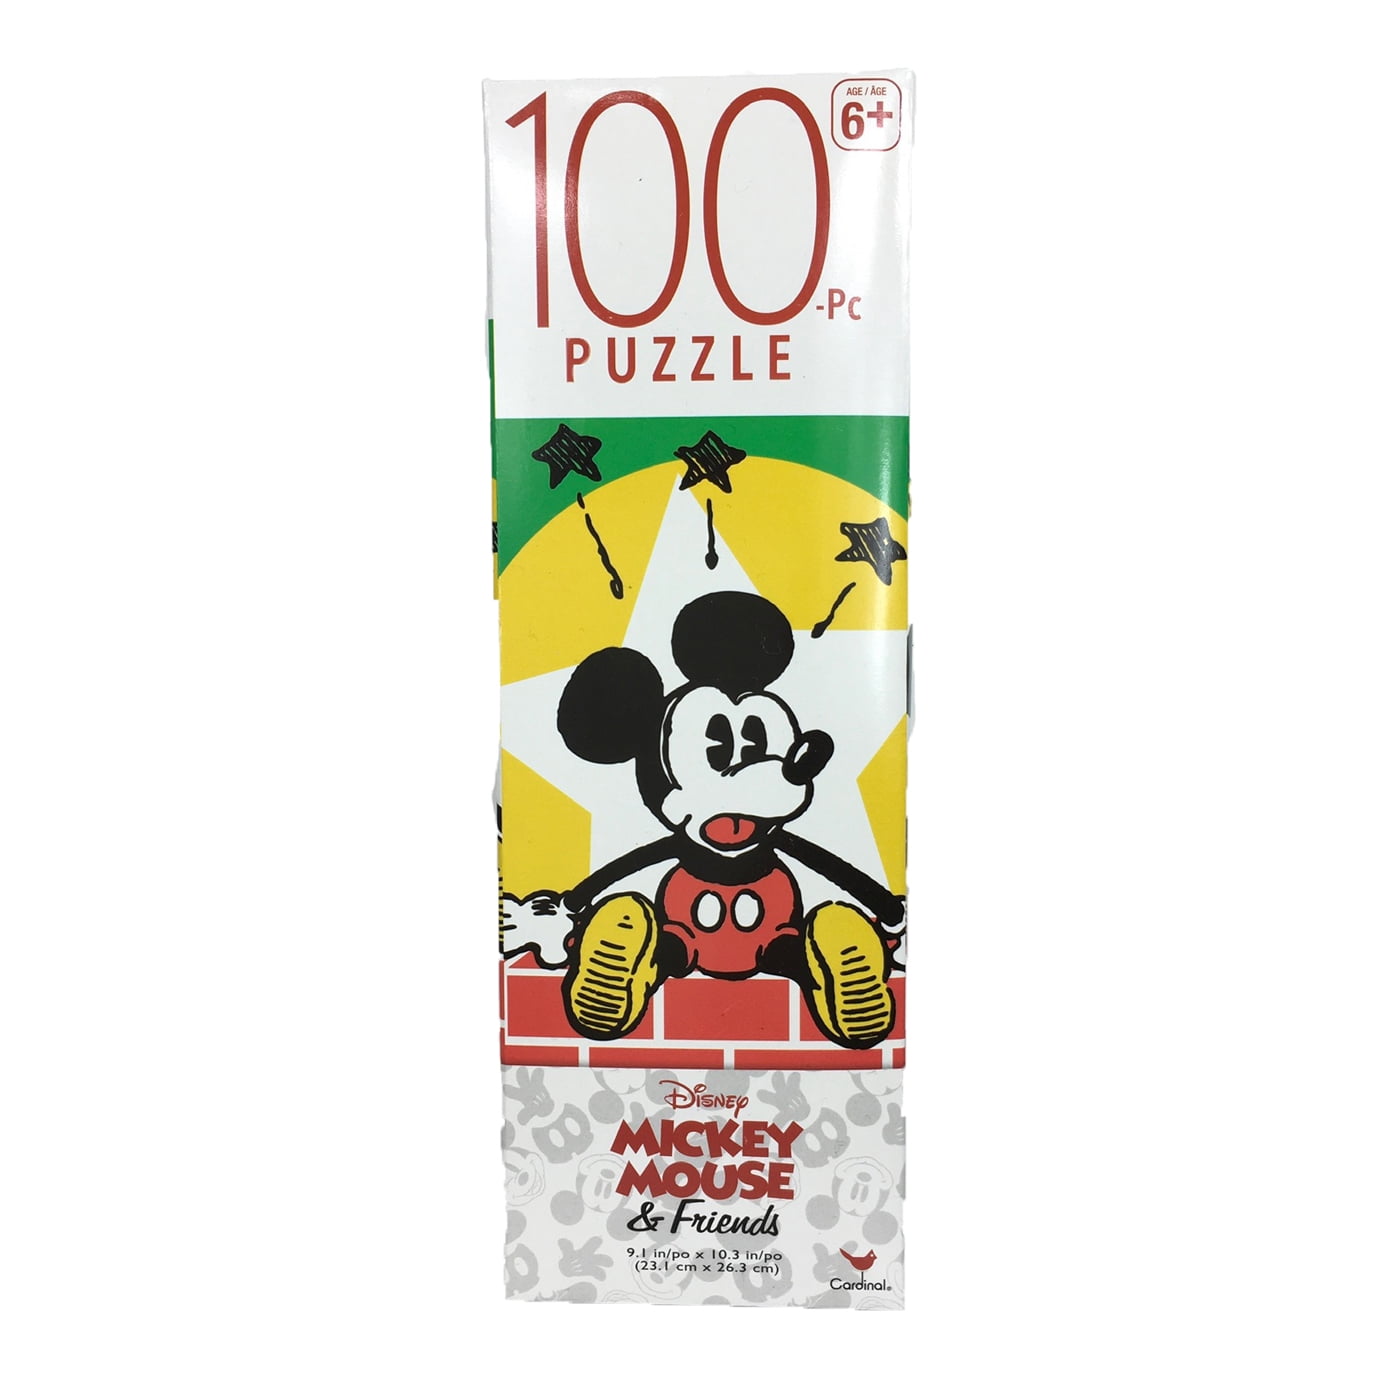 9.1in X 10.3in New Disney Mickey Mouse & Friends Puzzle 100 Pieces 